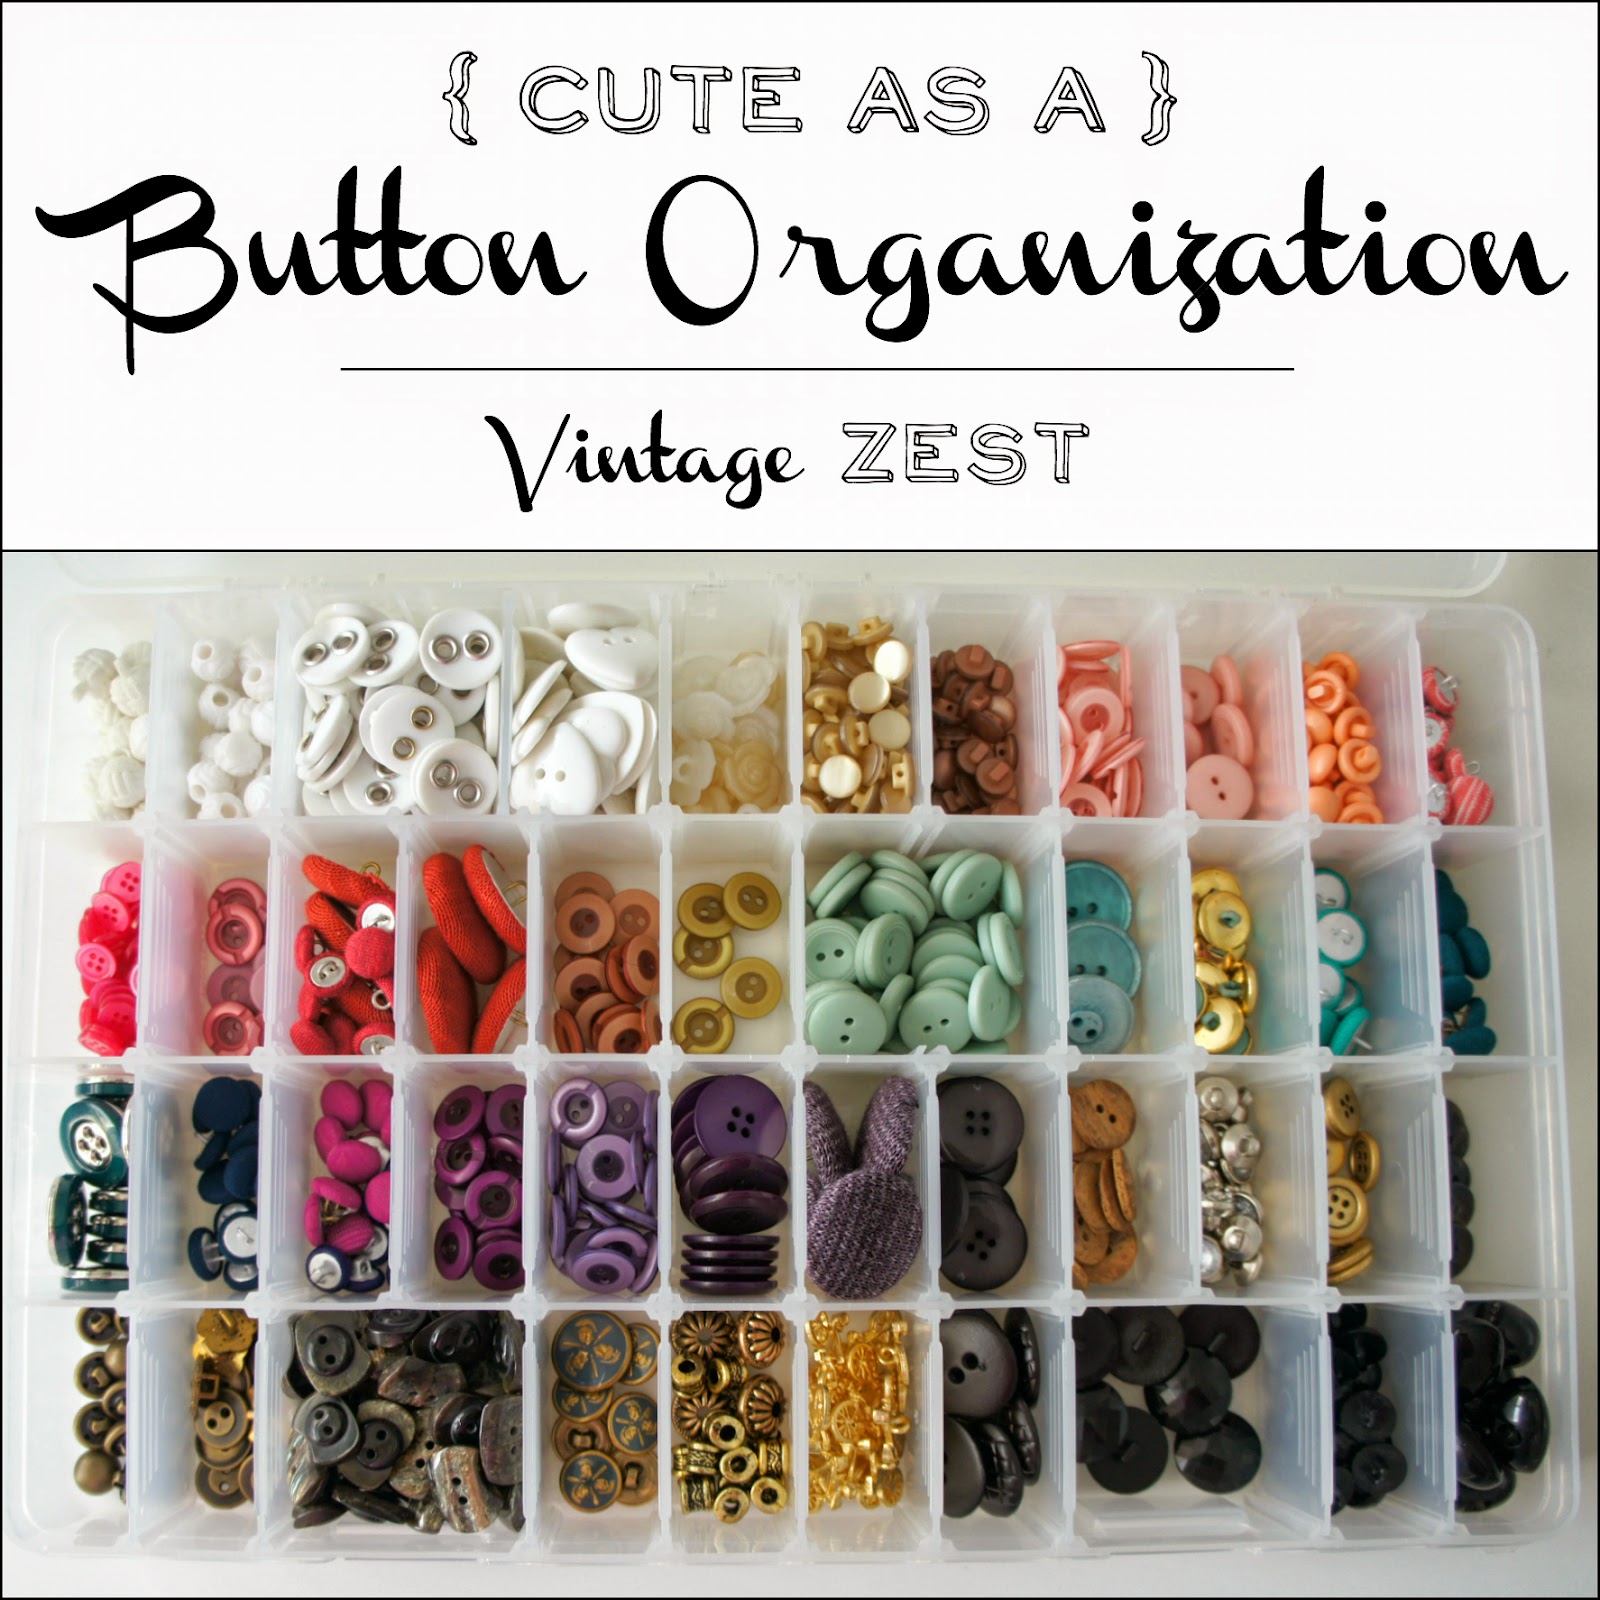 (Cute as a) Button Organization on Diane's Vintage Zest!  #organizing #sewing